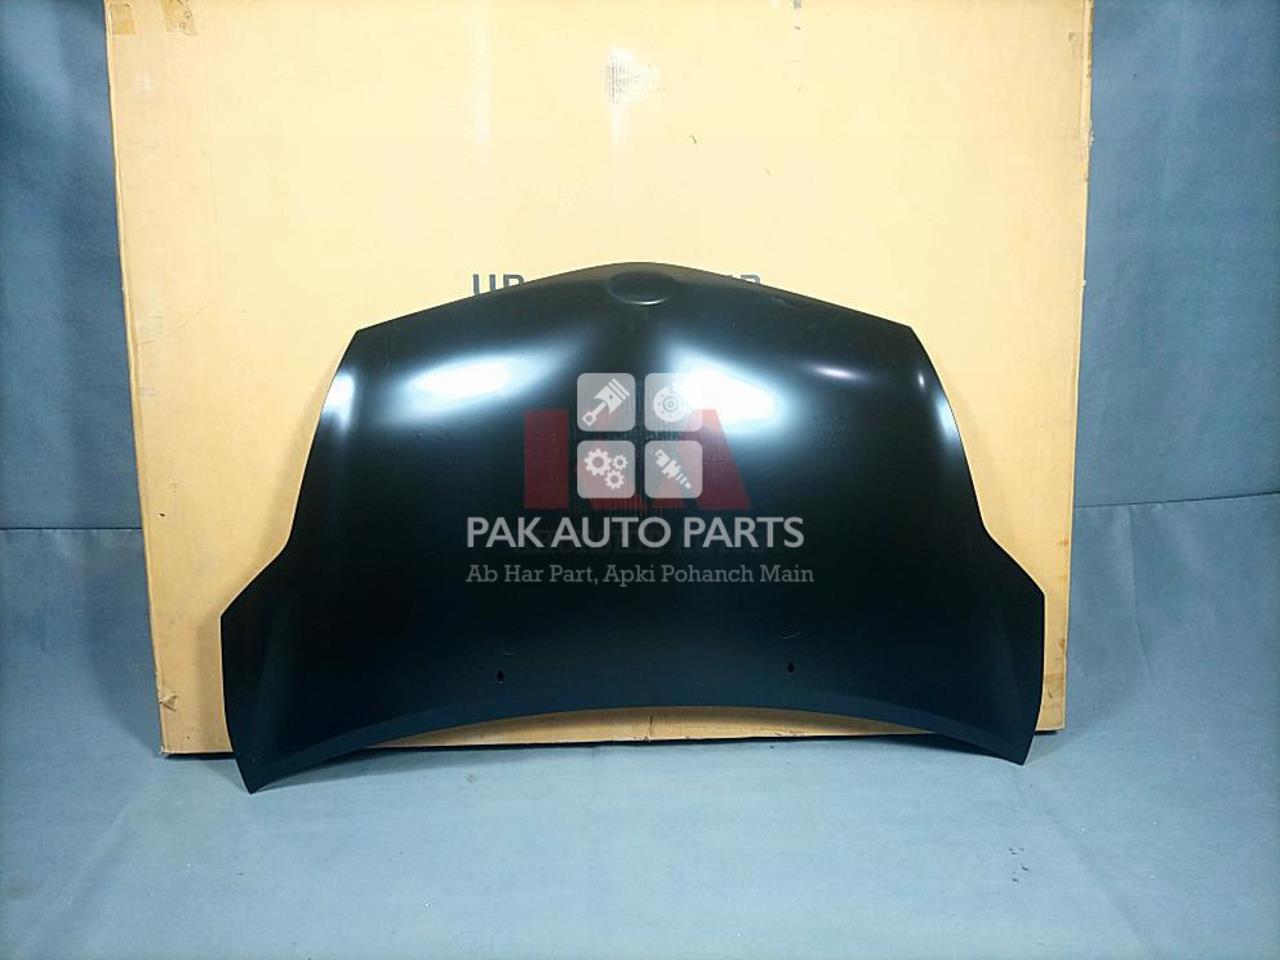 Picture of Toyota Prius 2007-11 Bonnet Hood